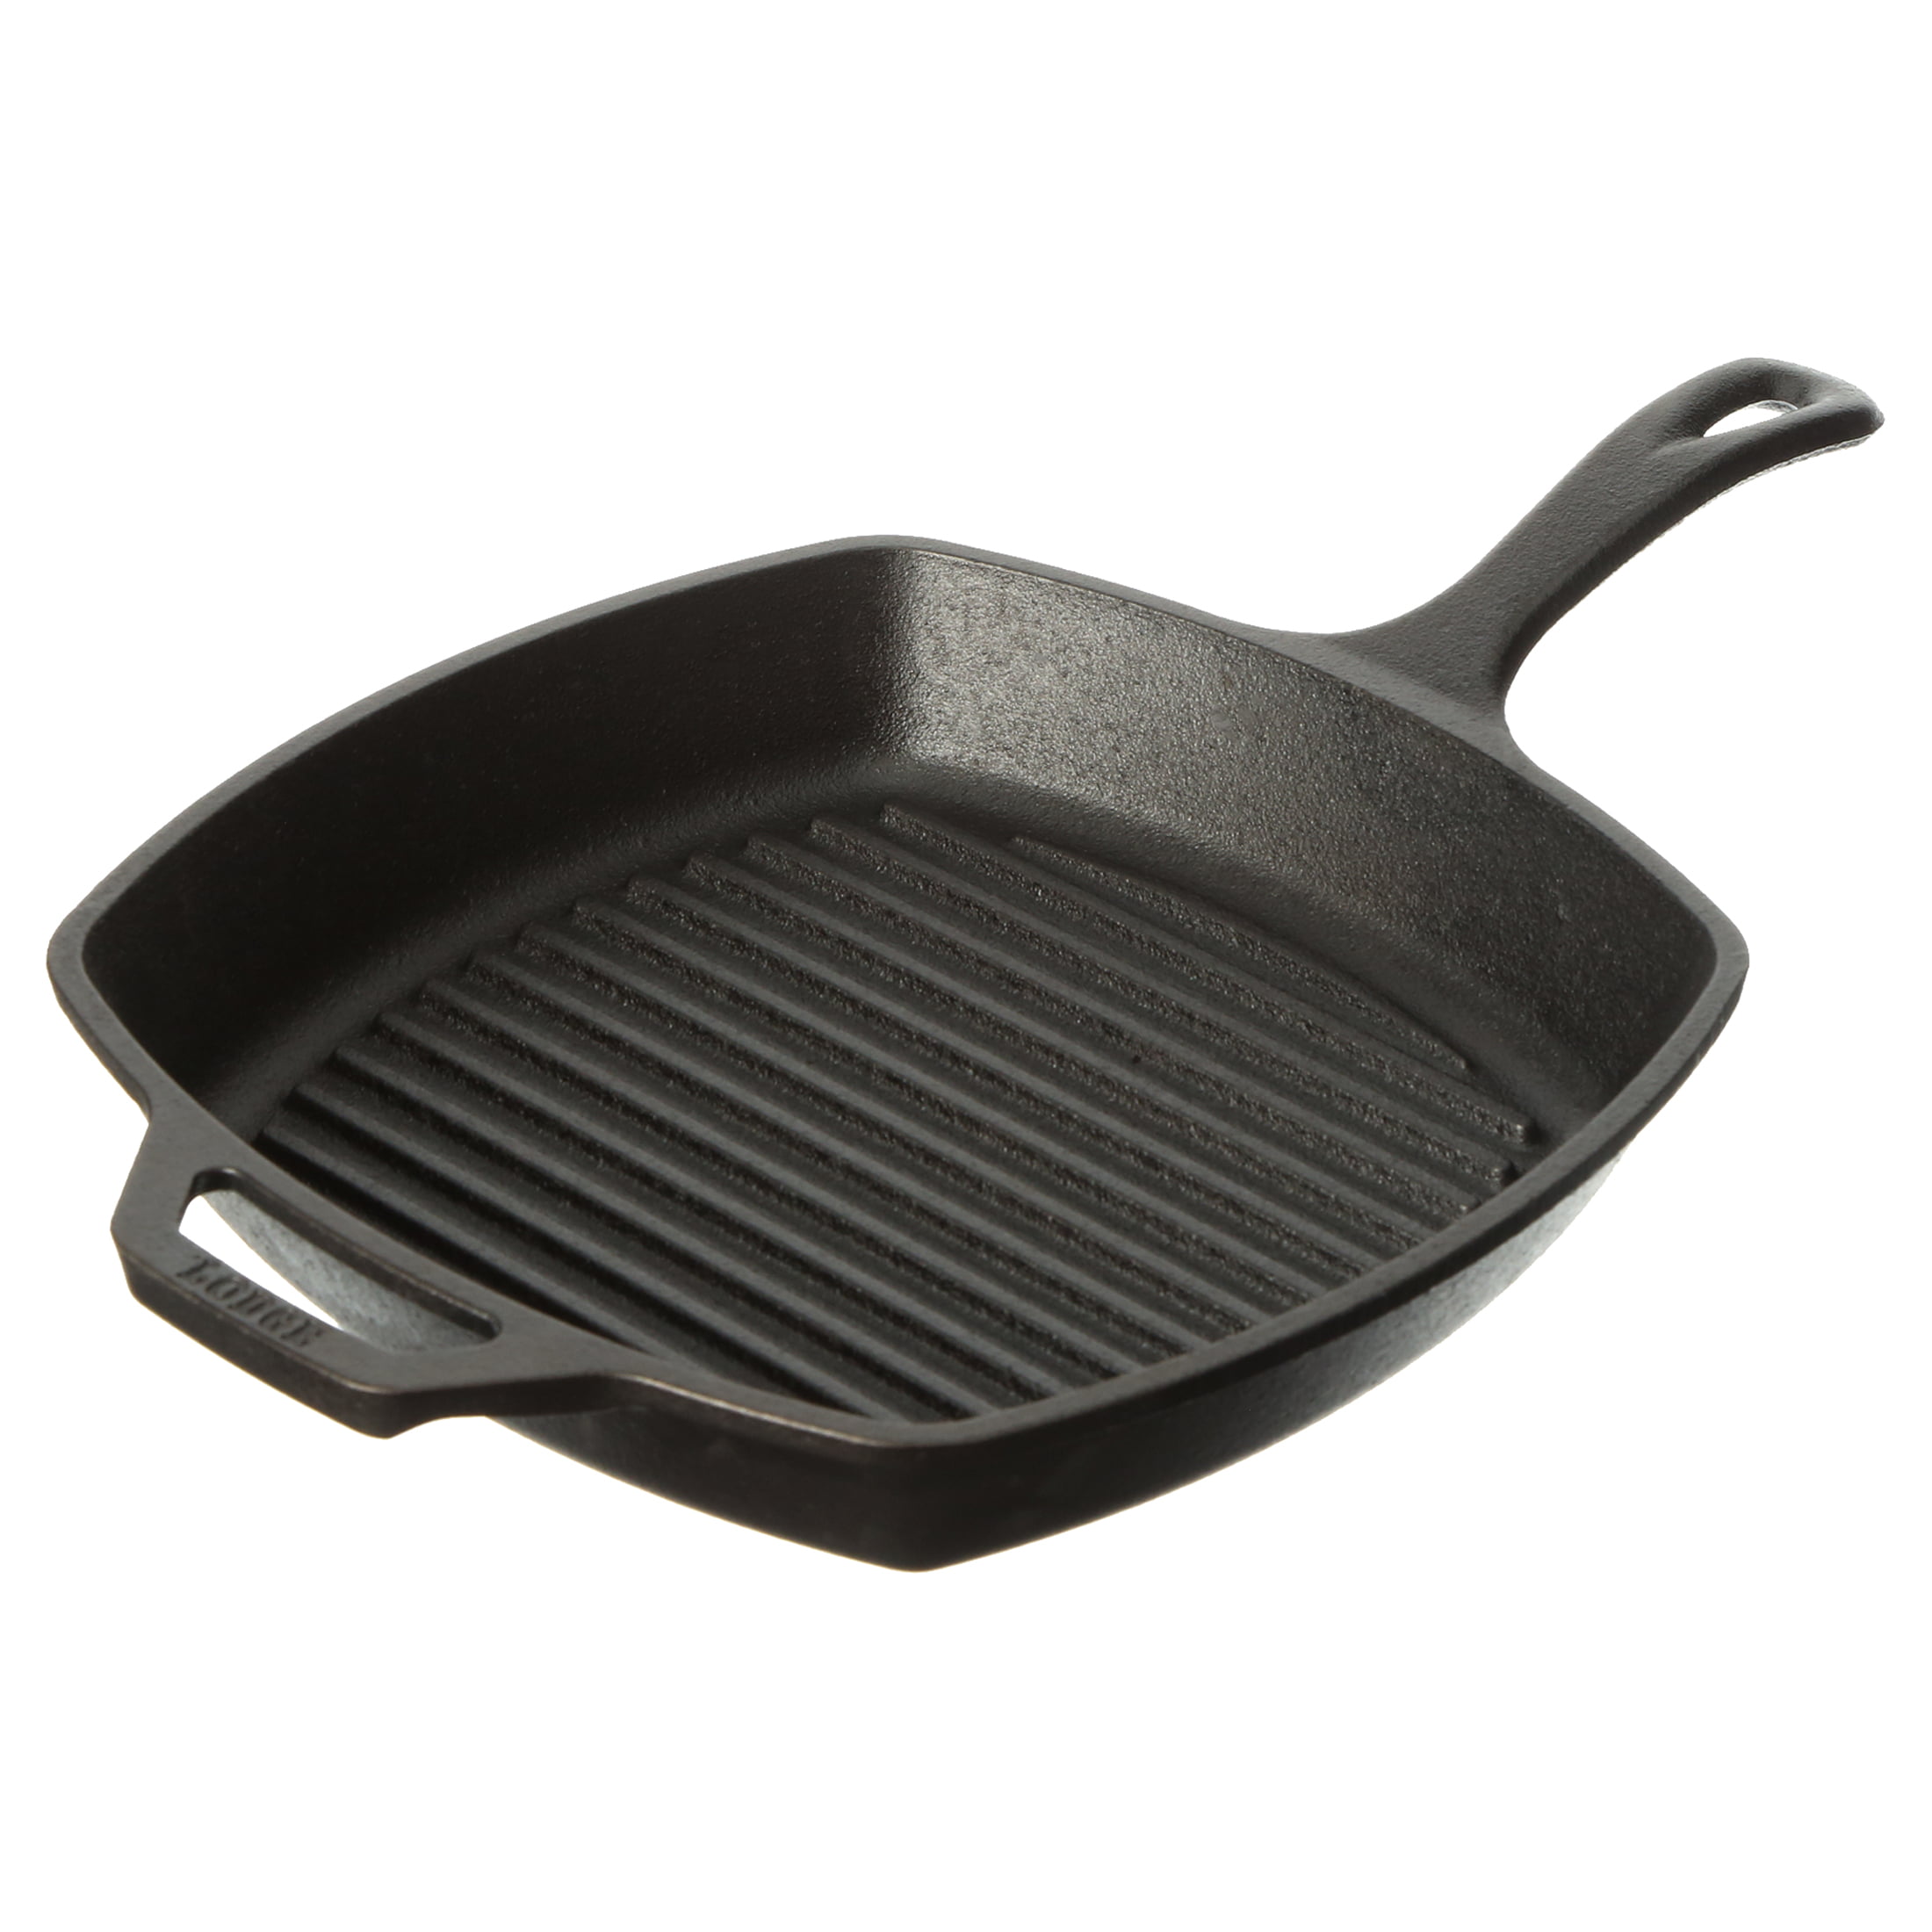 10.5 inch Black Details about   Lodge Pre-Seasoned Cast Iron Grill Pan With Assist Handle 